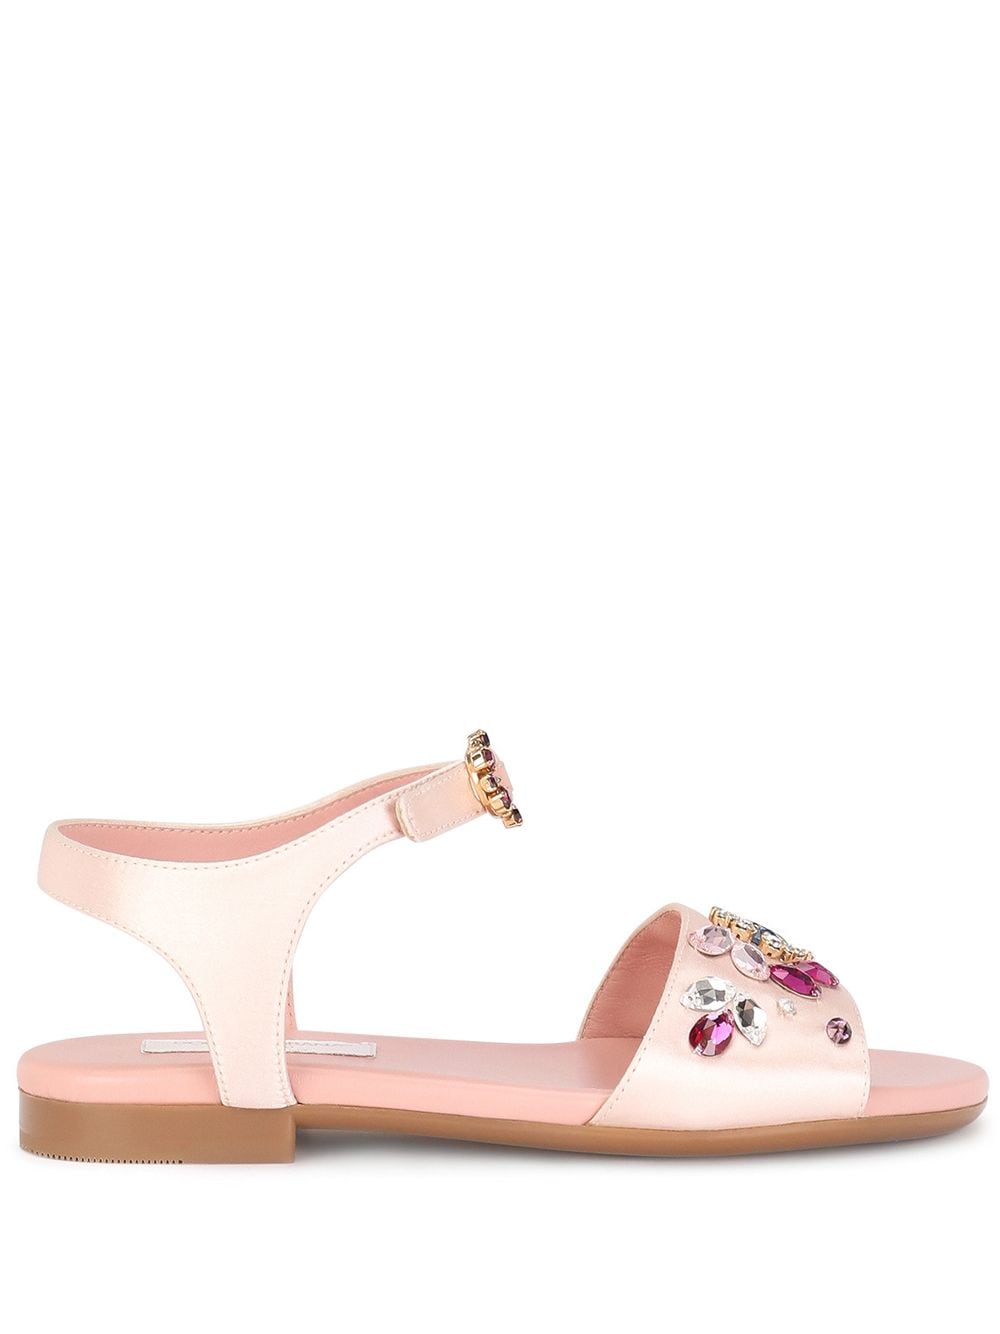 Dolce & Gabbana Kids' Satin Ankle-strap Sandals With Bejeweled Embellishment In Pink